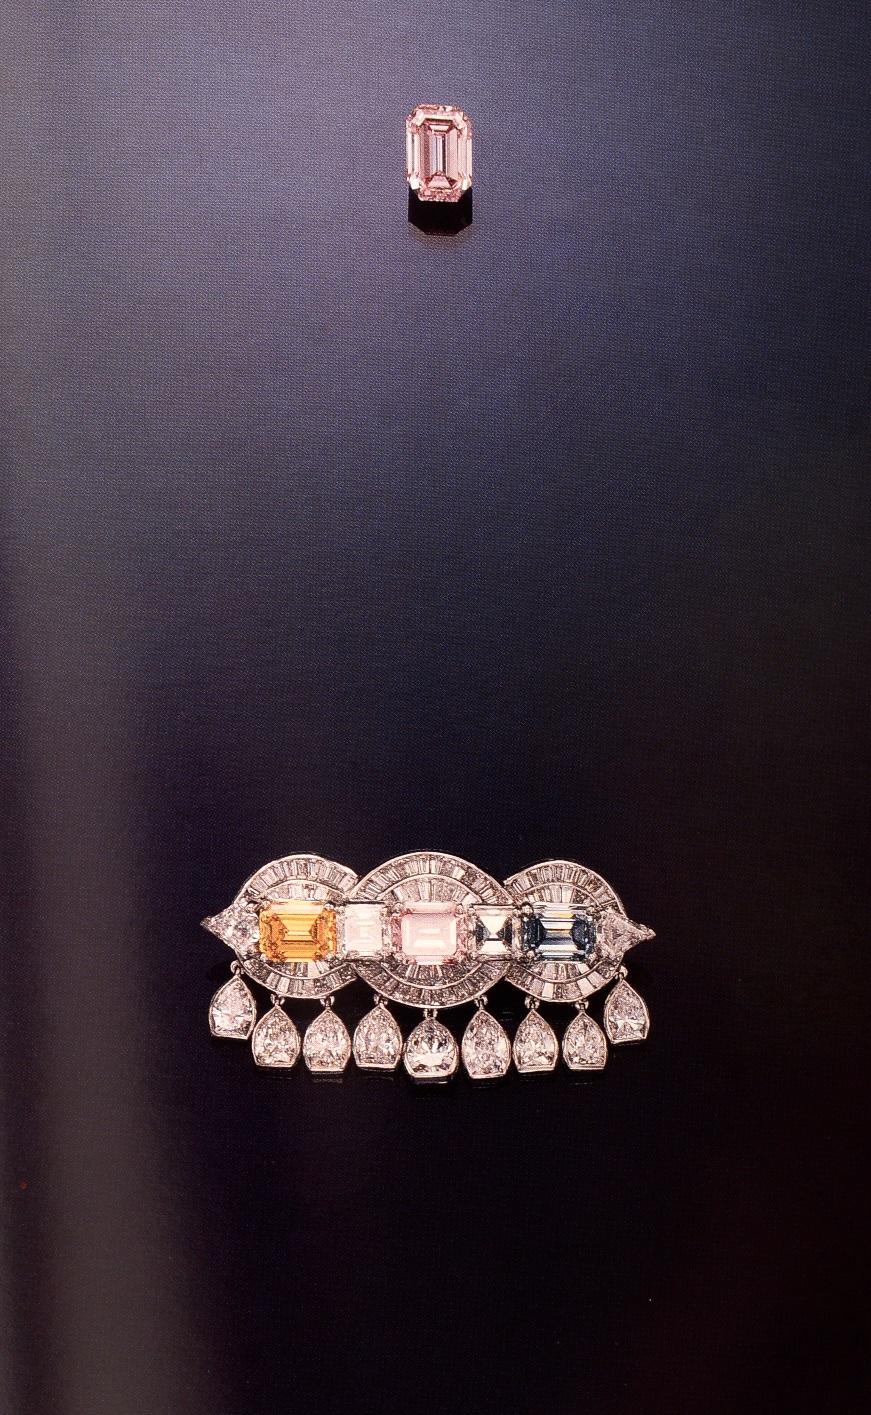 Magnificent Jewelry, New York, April 22-23, 1991, Sotheby's Sale # 6163 3